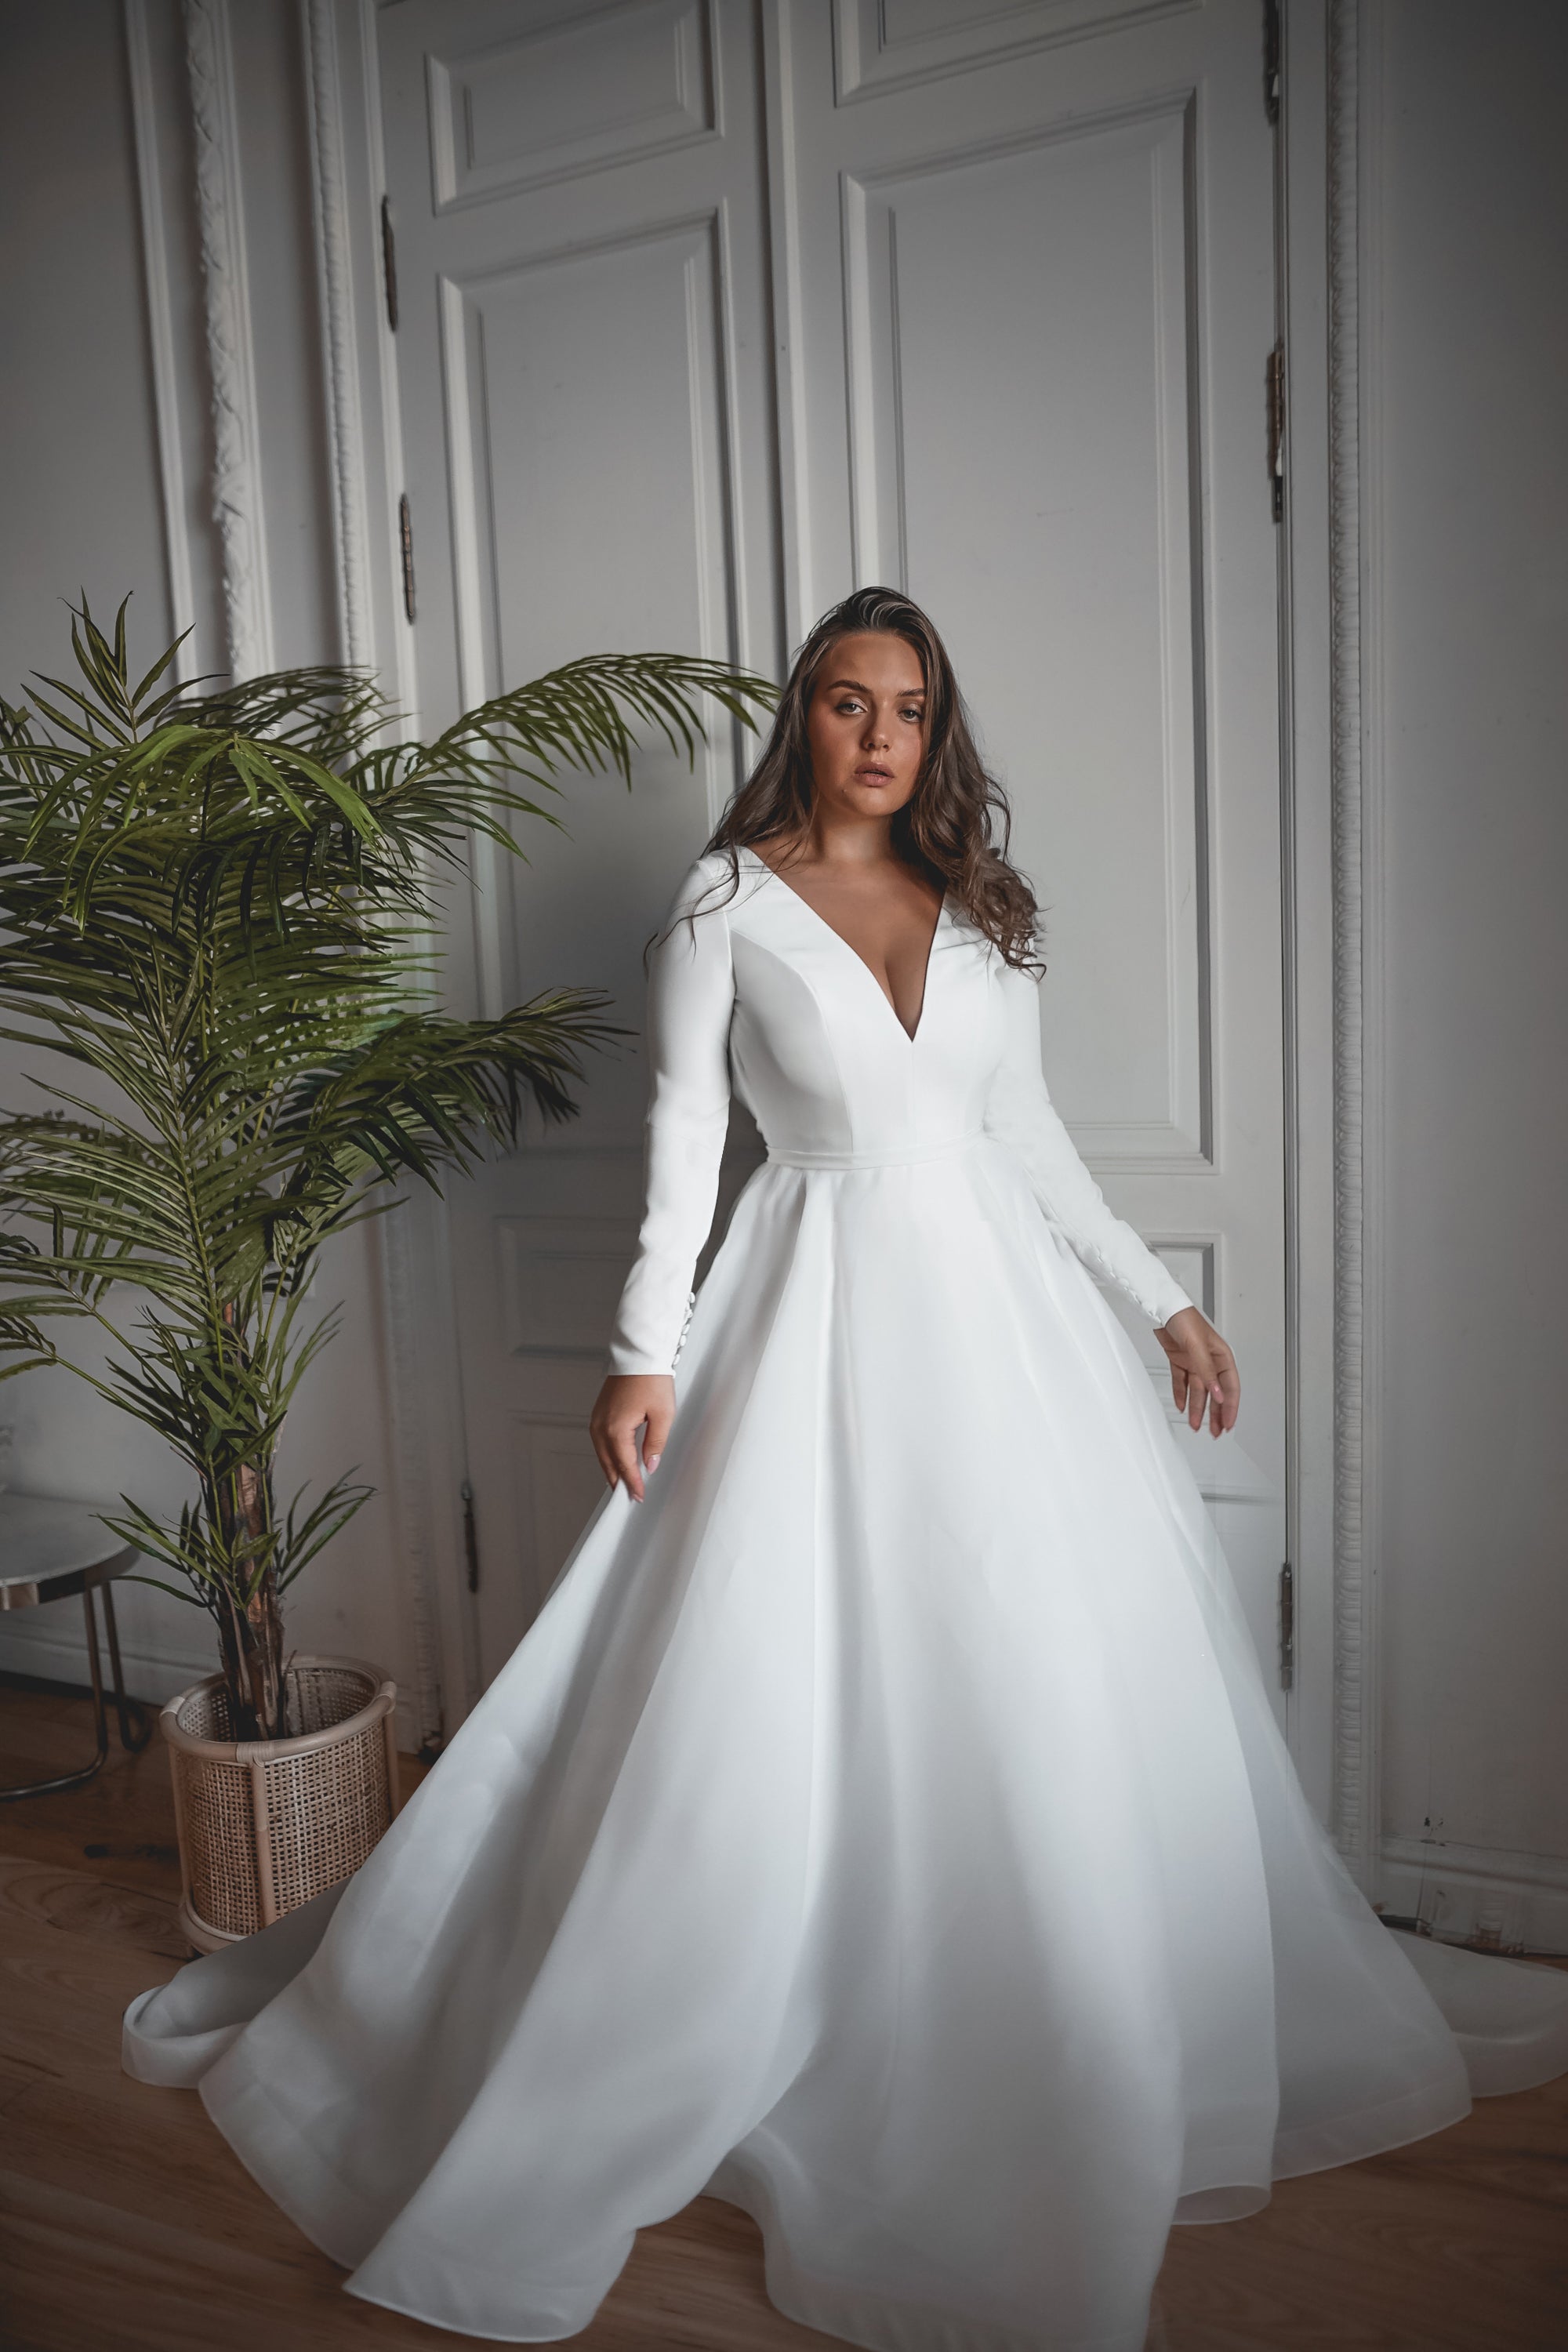 How To Glam Up A Simple Minimalist Wedding Dress